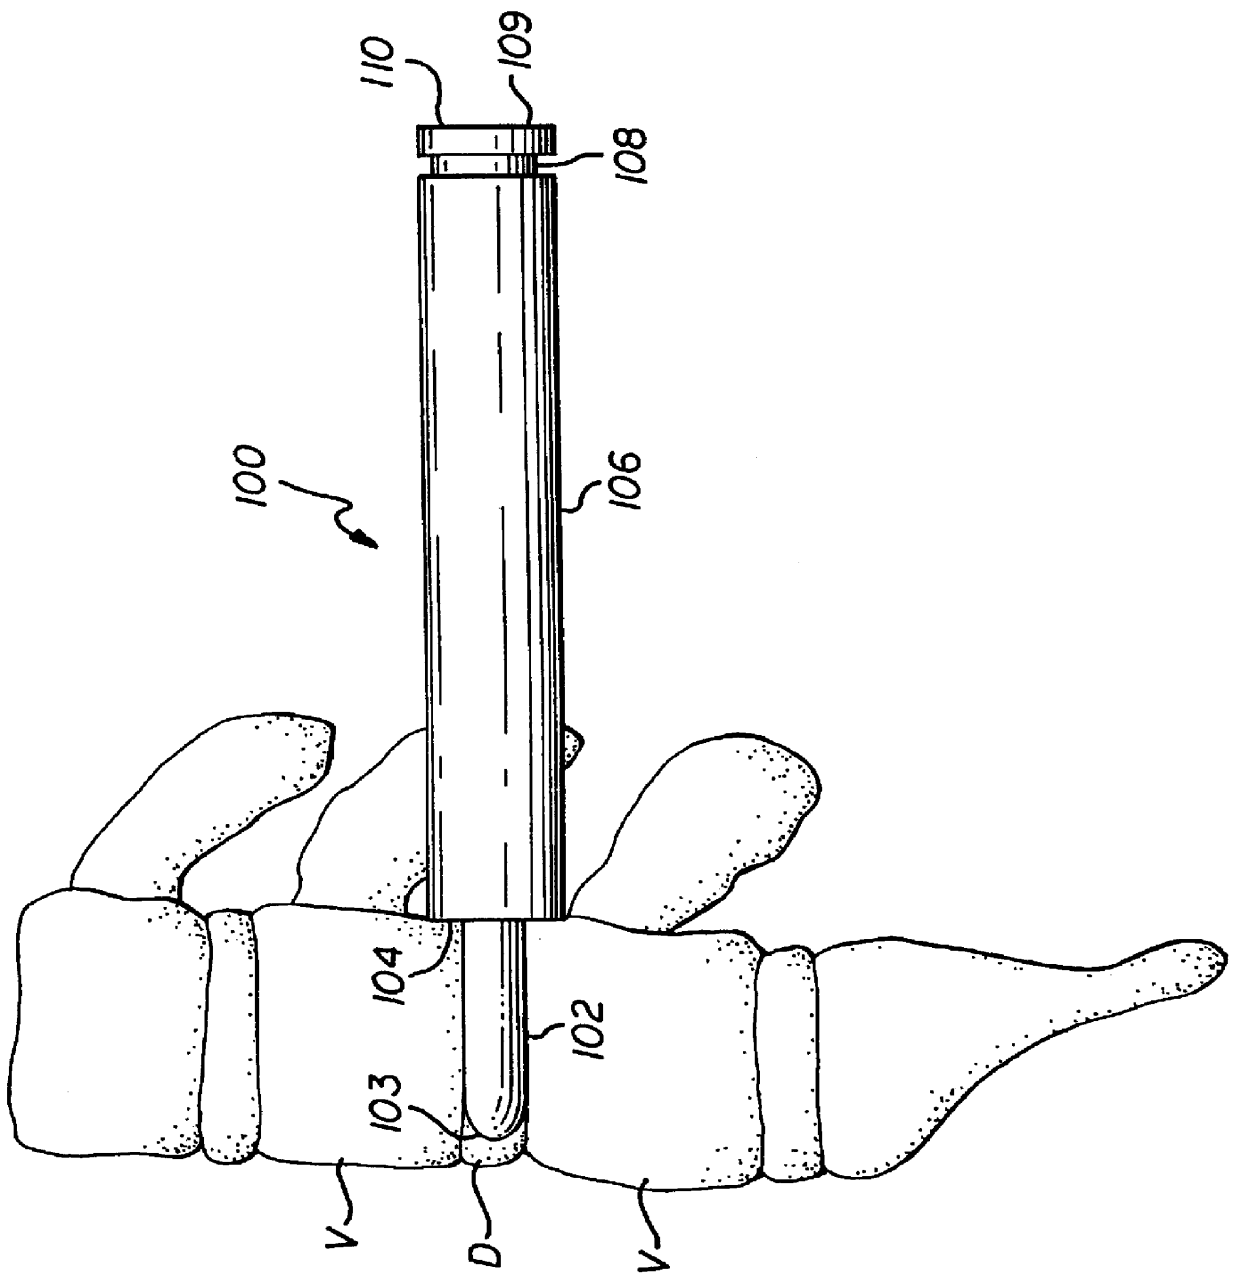 Apparatus for inserting spinal implants